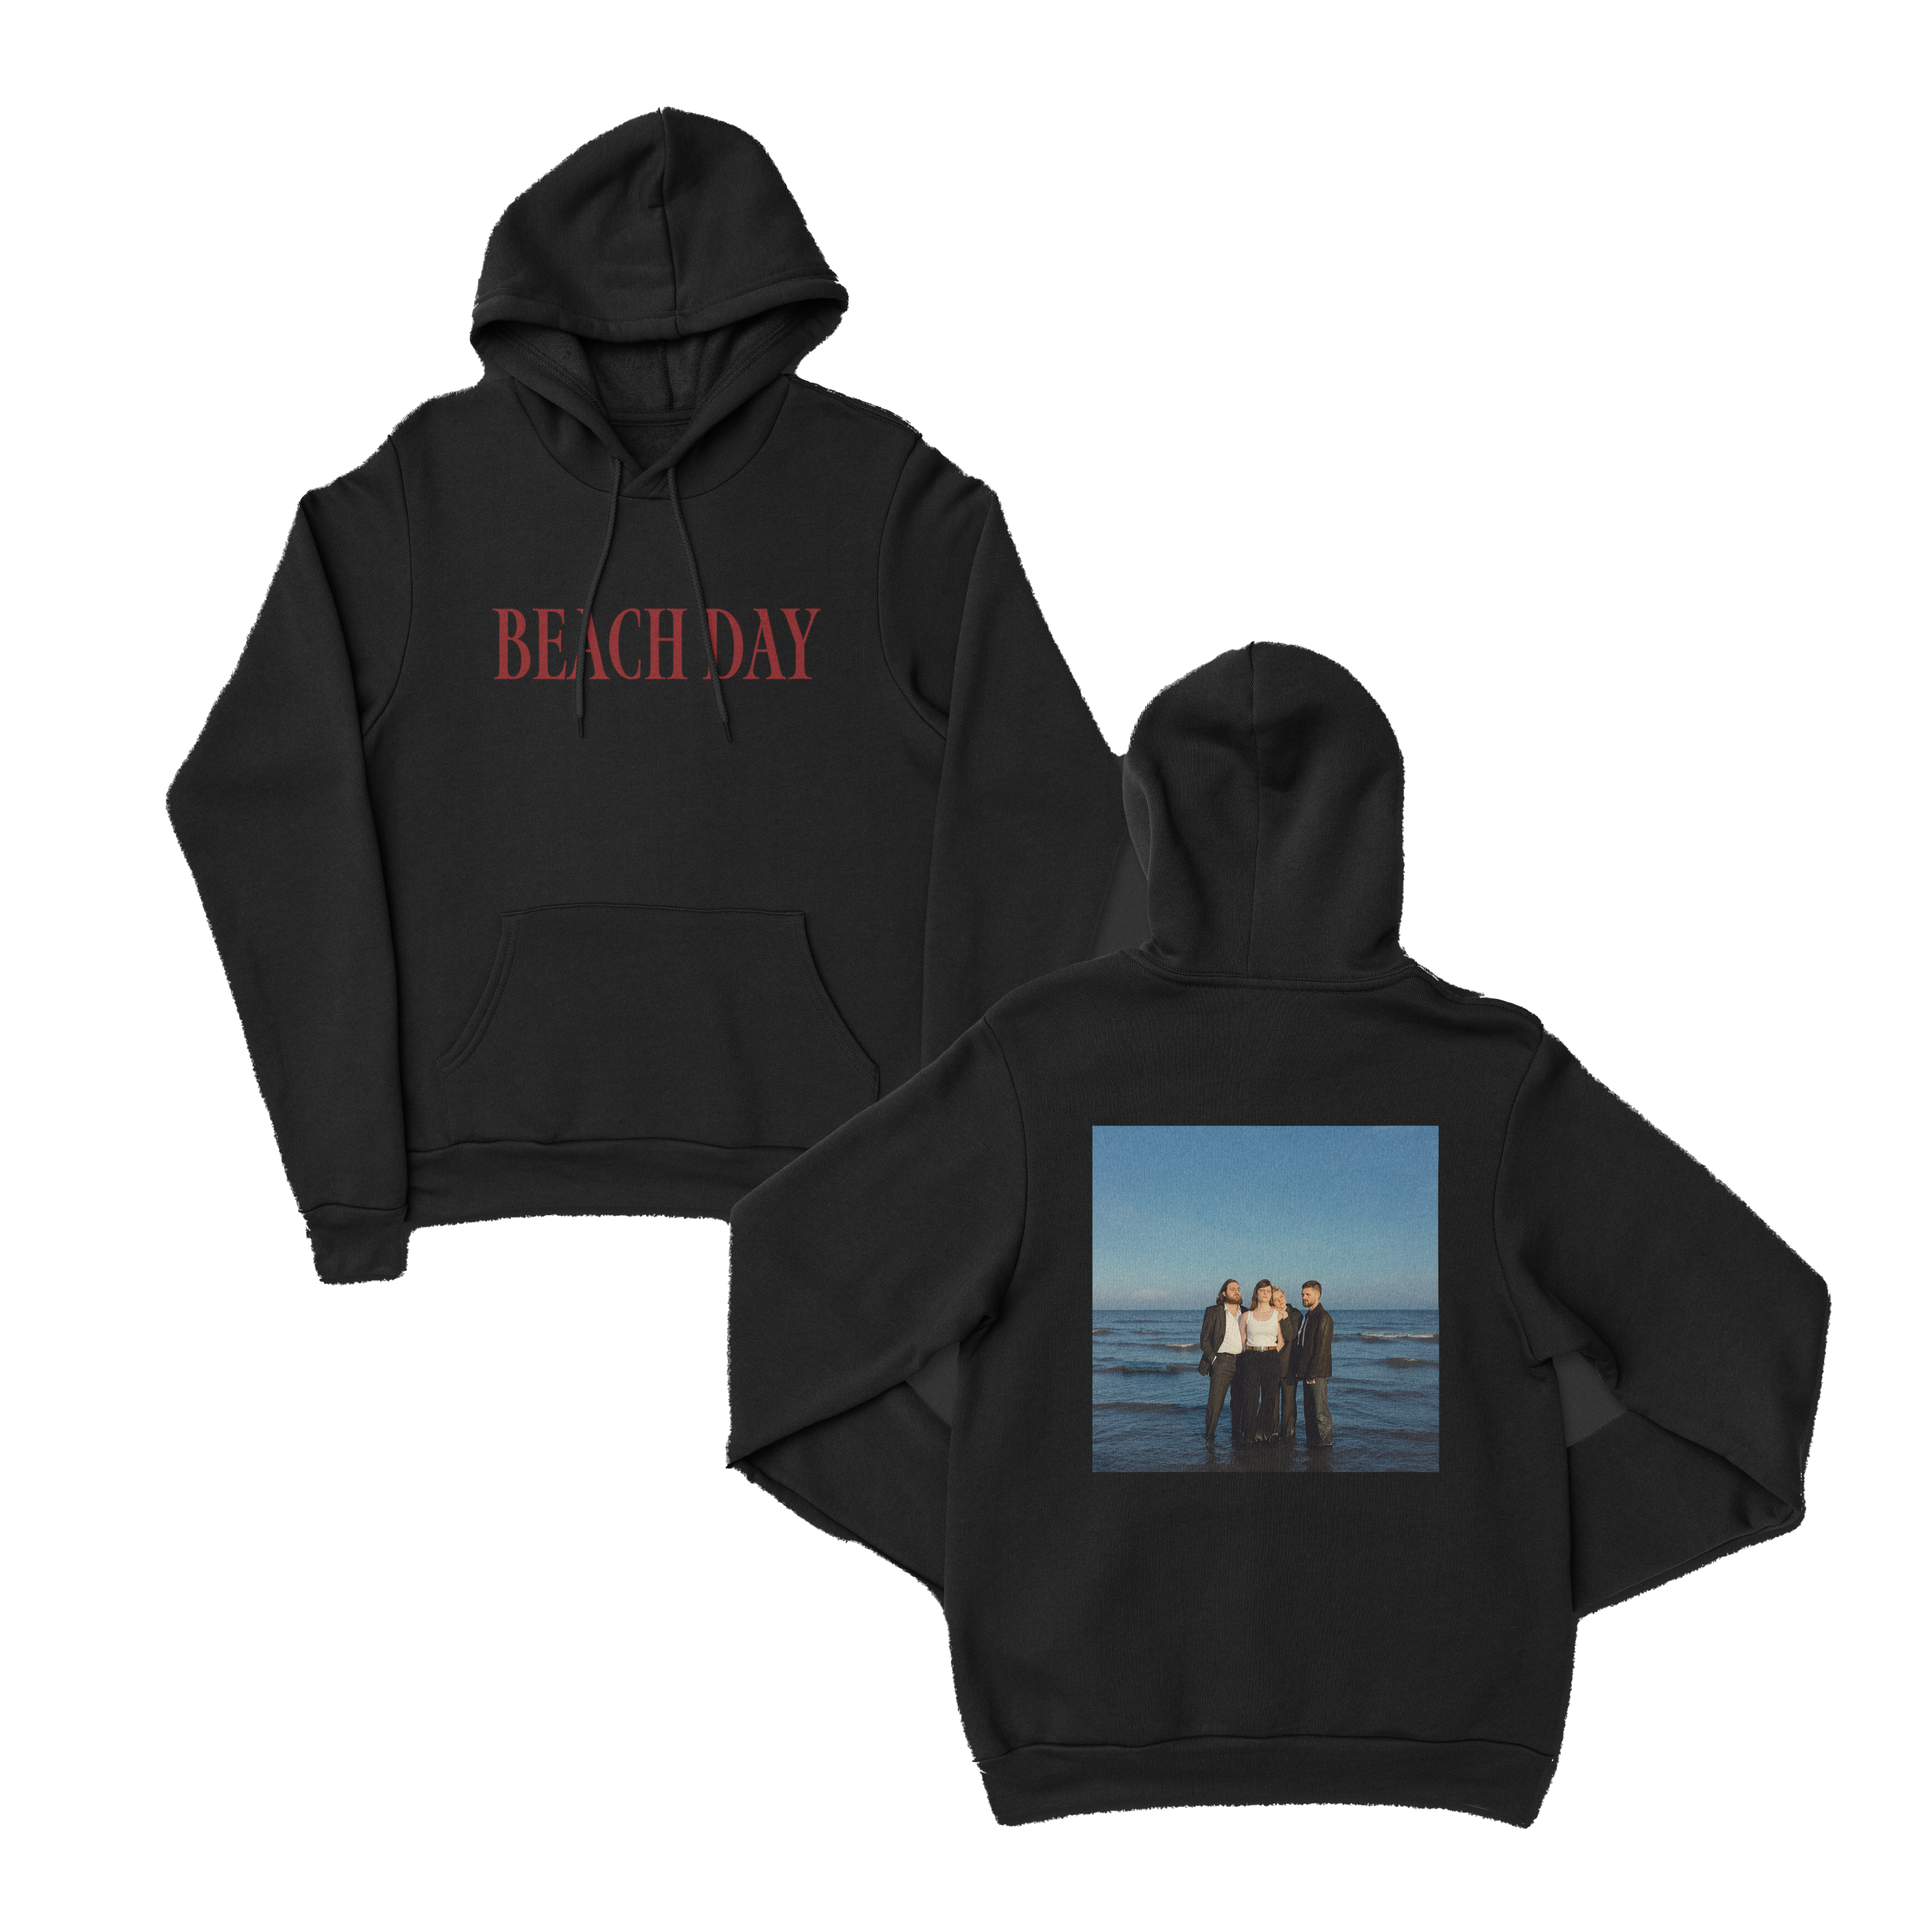 Another Sky - Another Sky Hoodie.